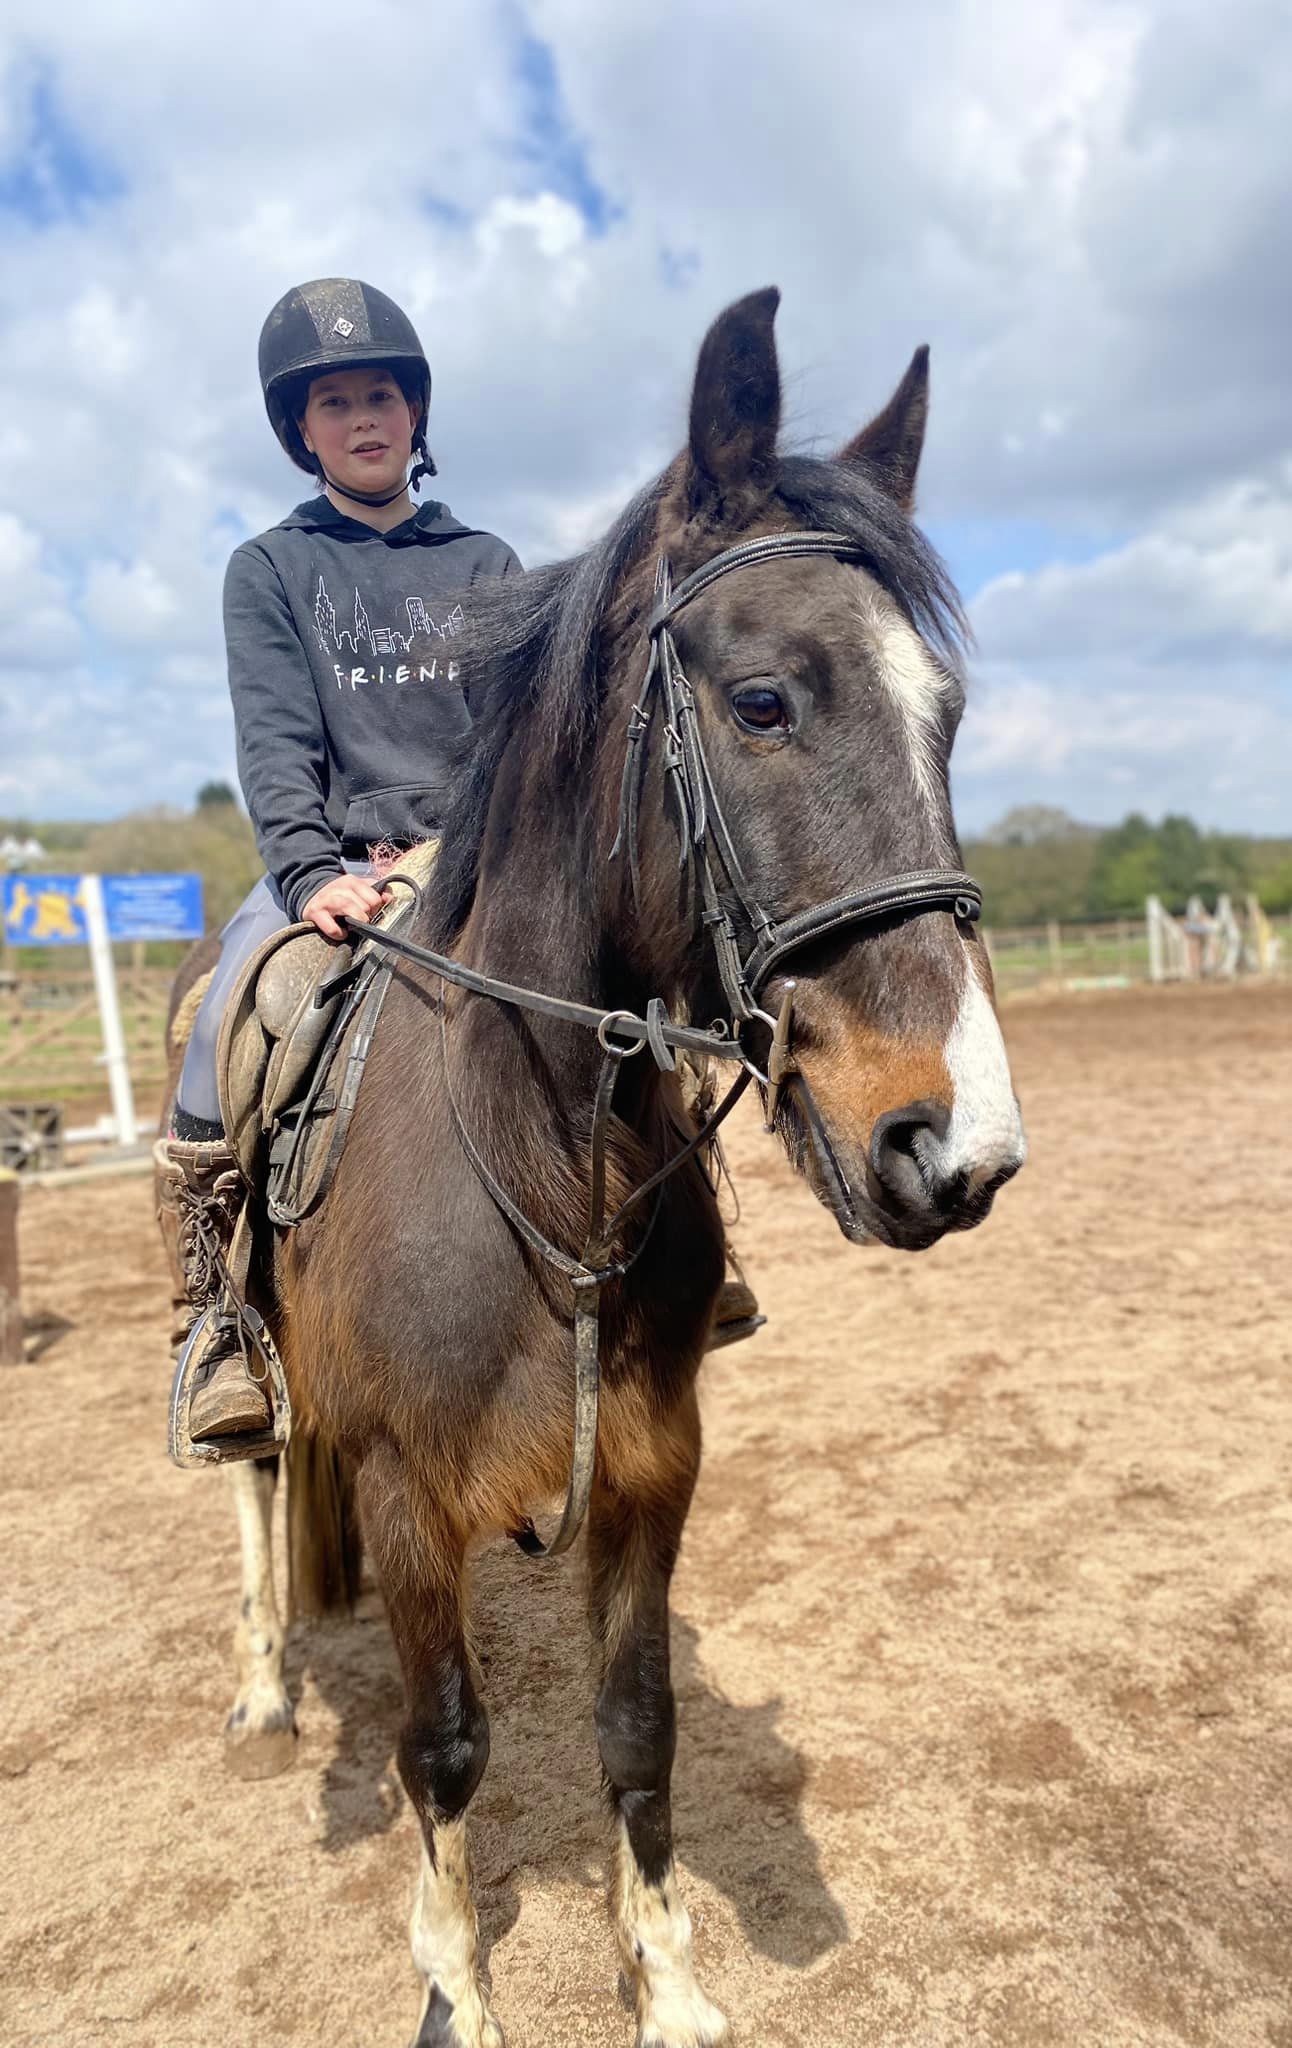 ⭐️⭐️DELBOY⭐️⭐️ Approx 15.1hh 12yr old  Sport horse type gelding - SOLD